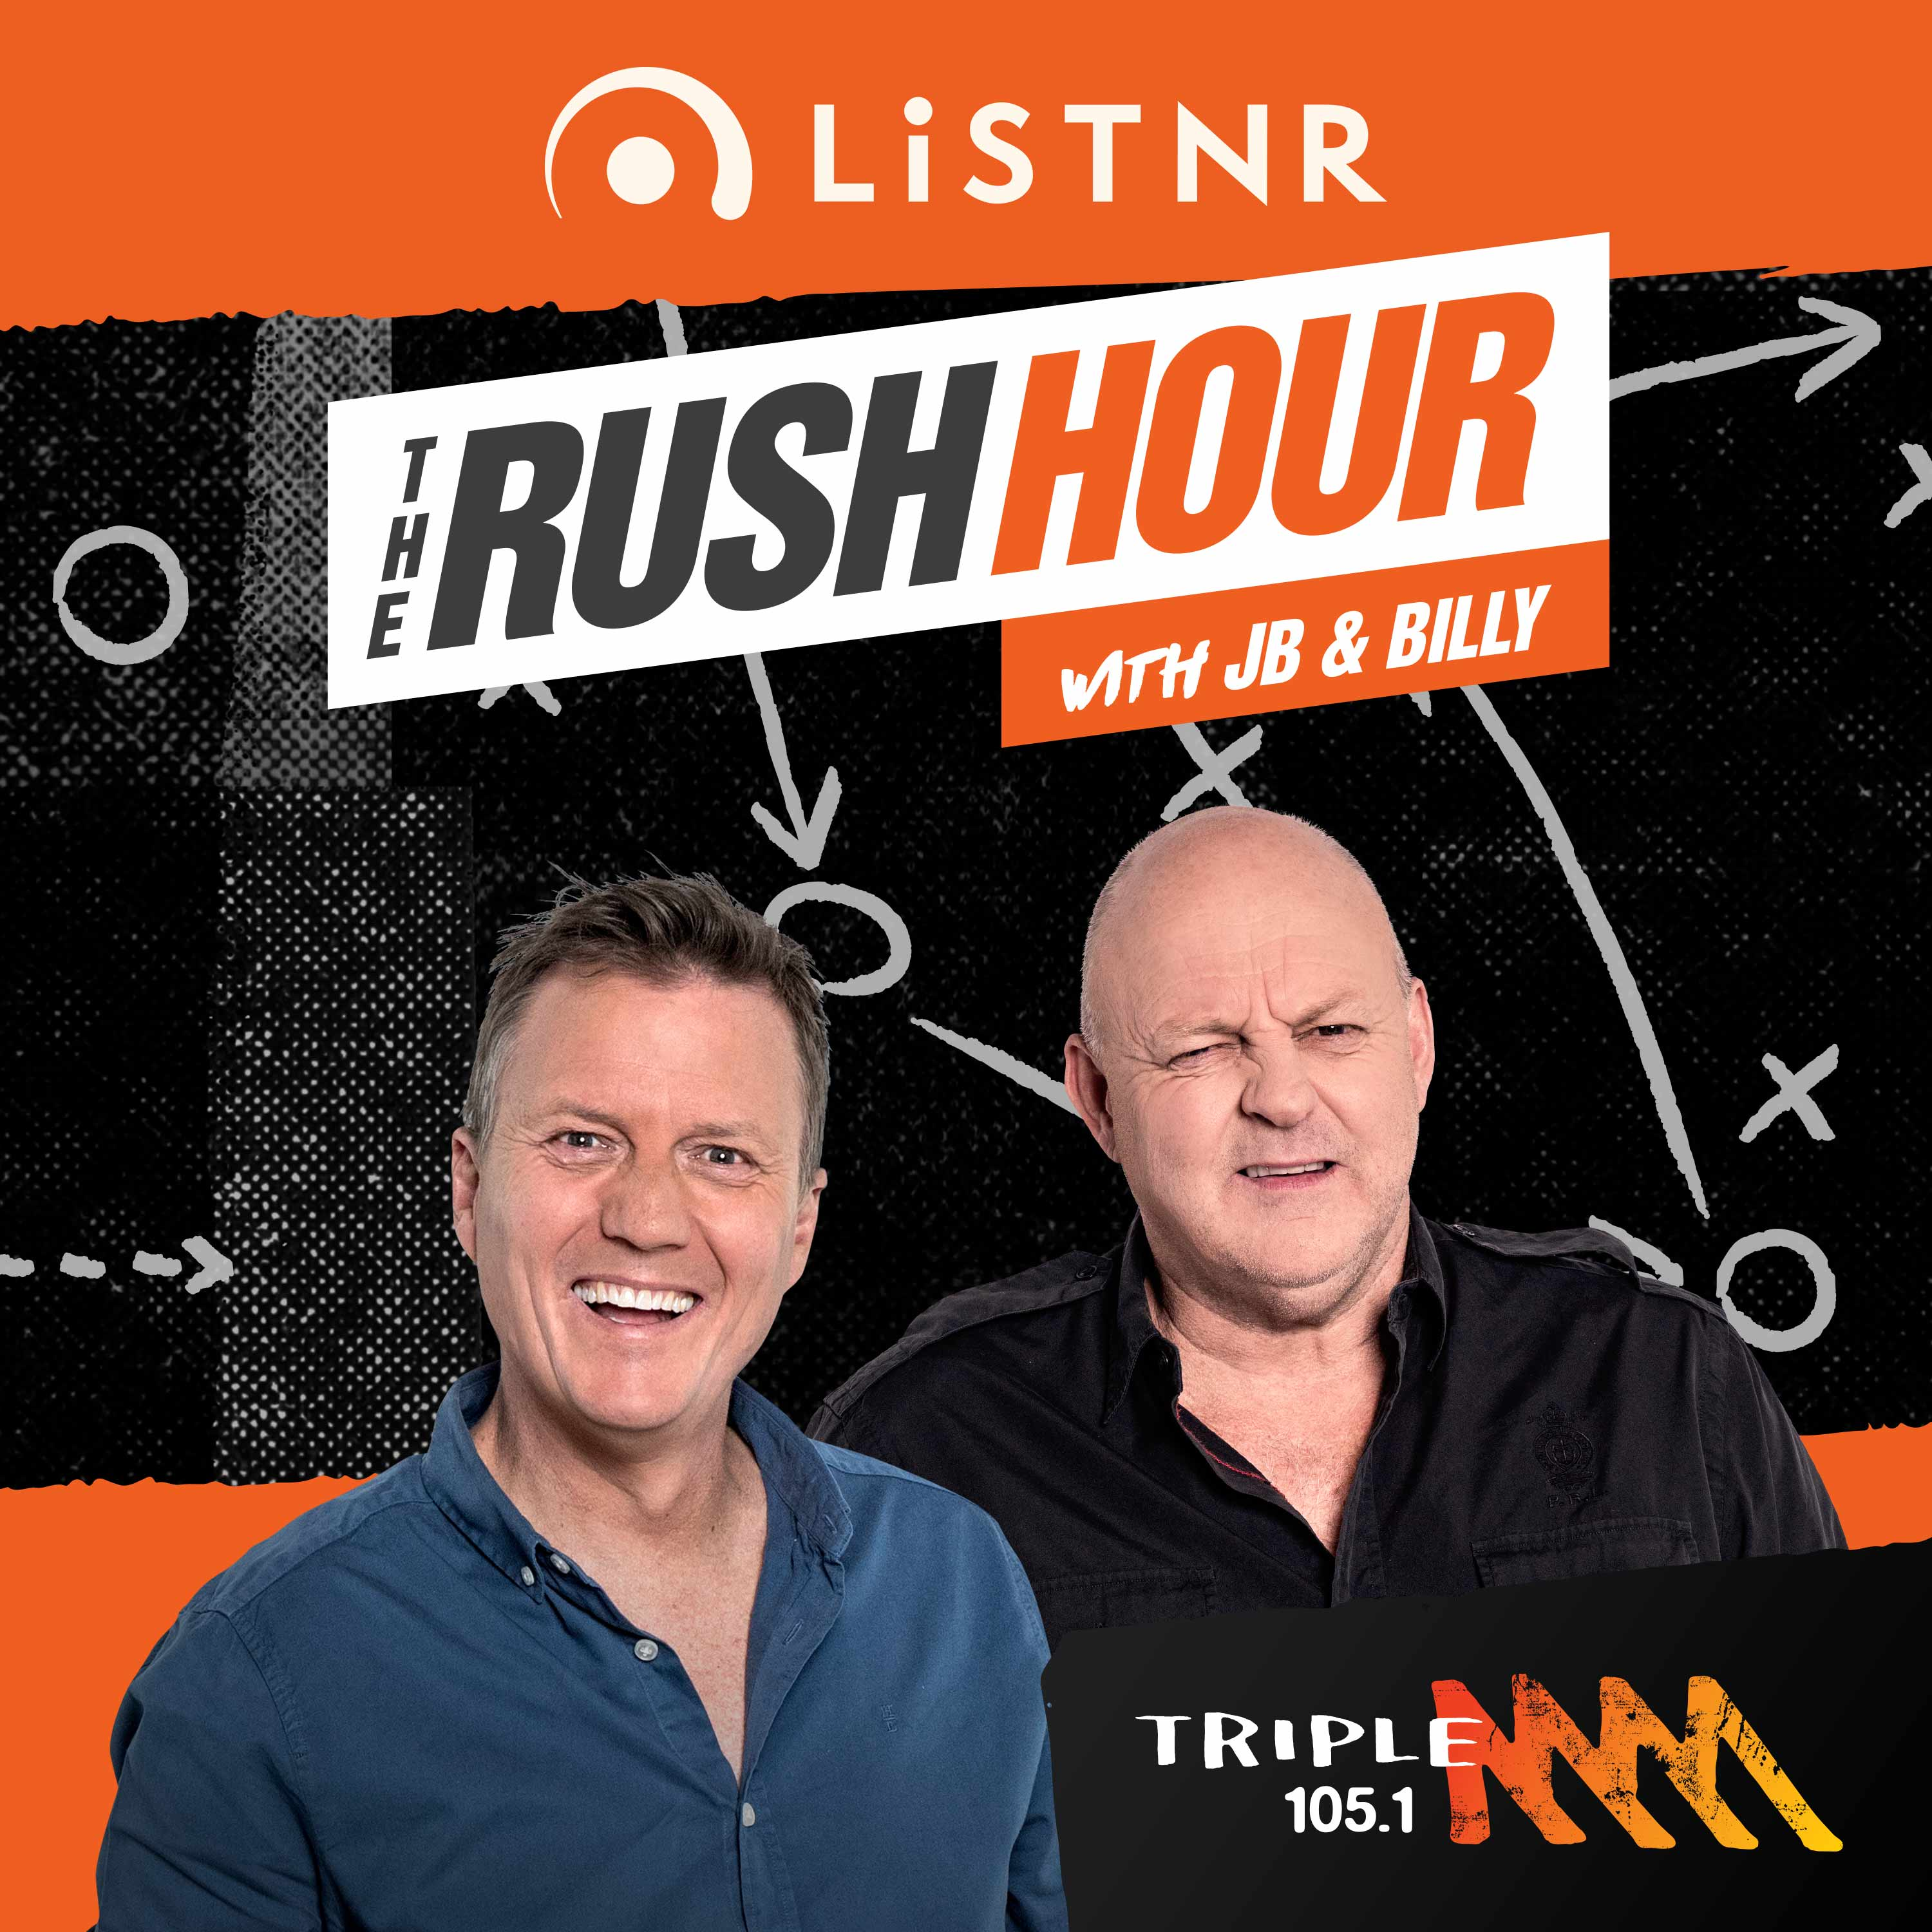 Jay Z Clark's Massive Trade Period Preview, Wil Anderson, We Pay Tribute To Joel Selwood - The Rush Hour podcast - Wednesday 28th September 2022